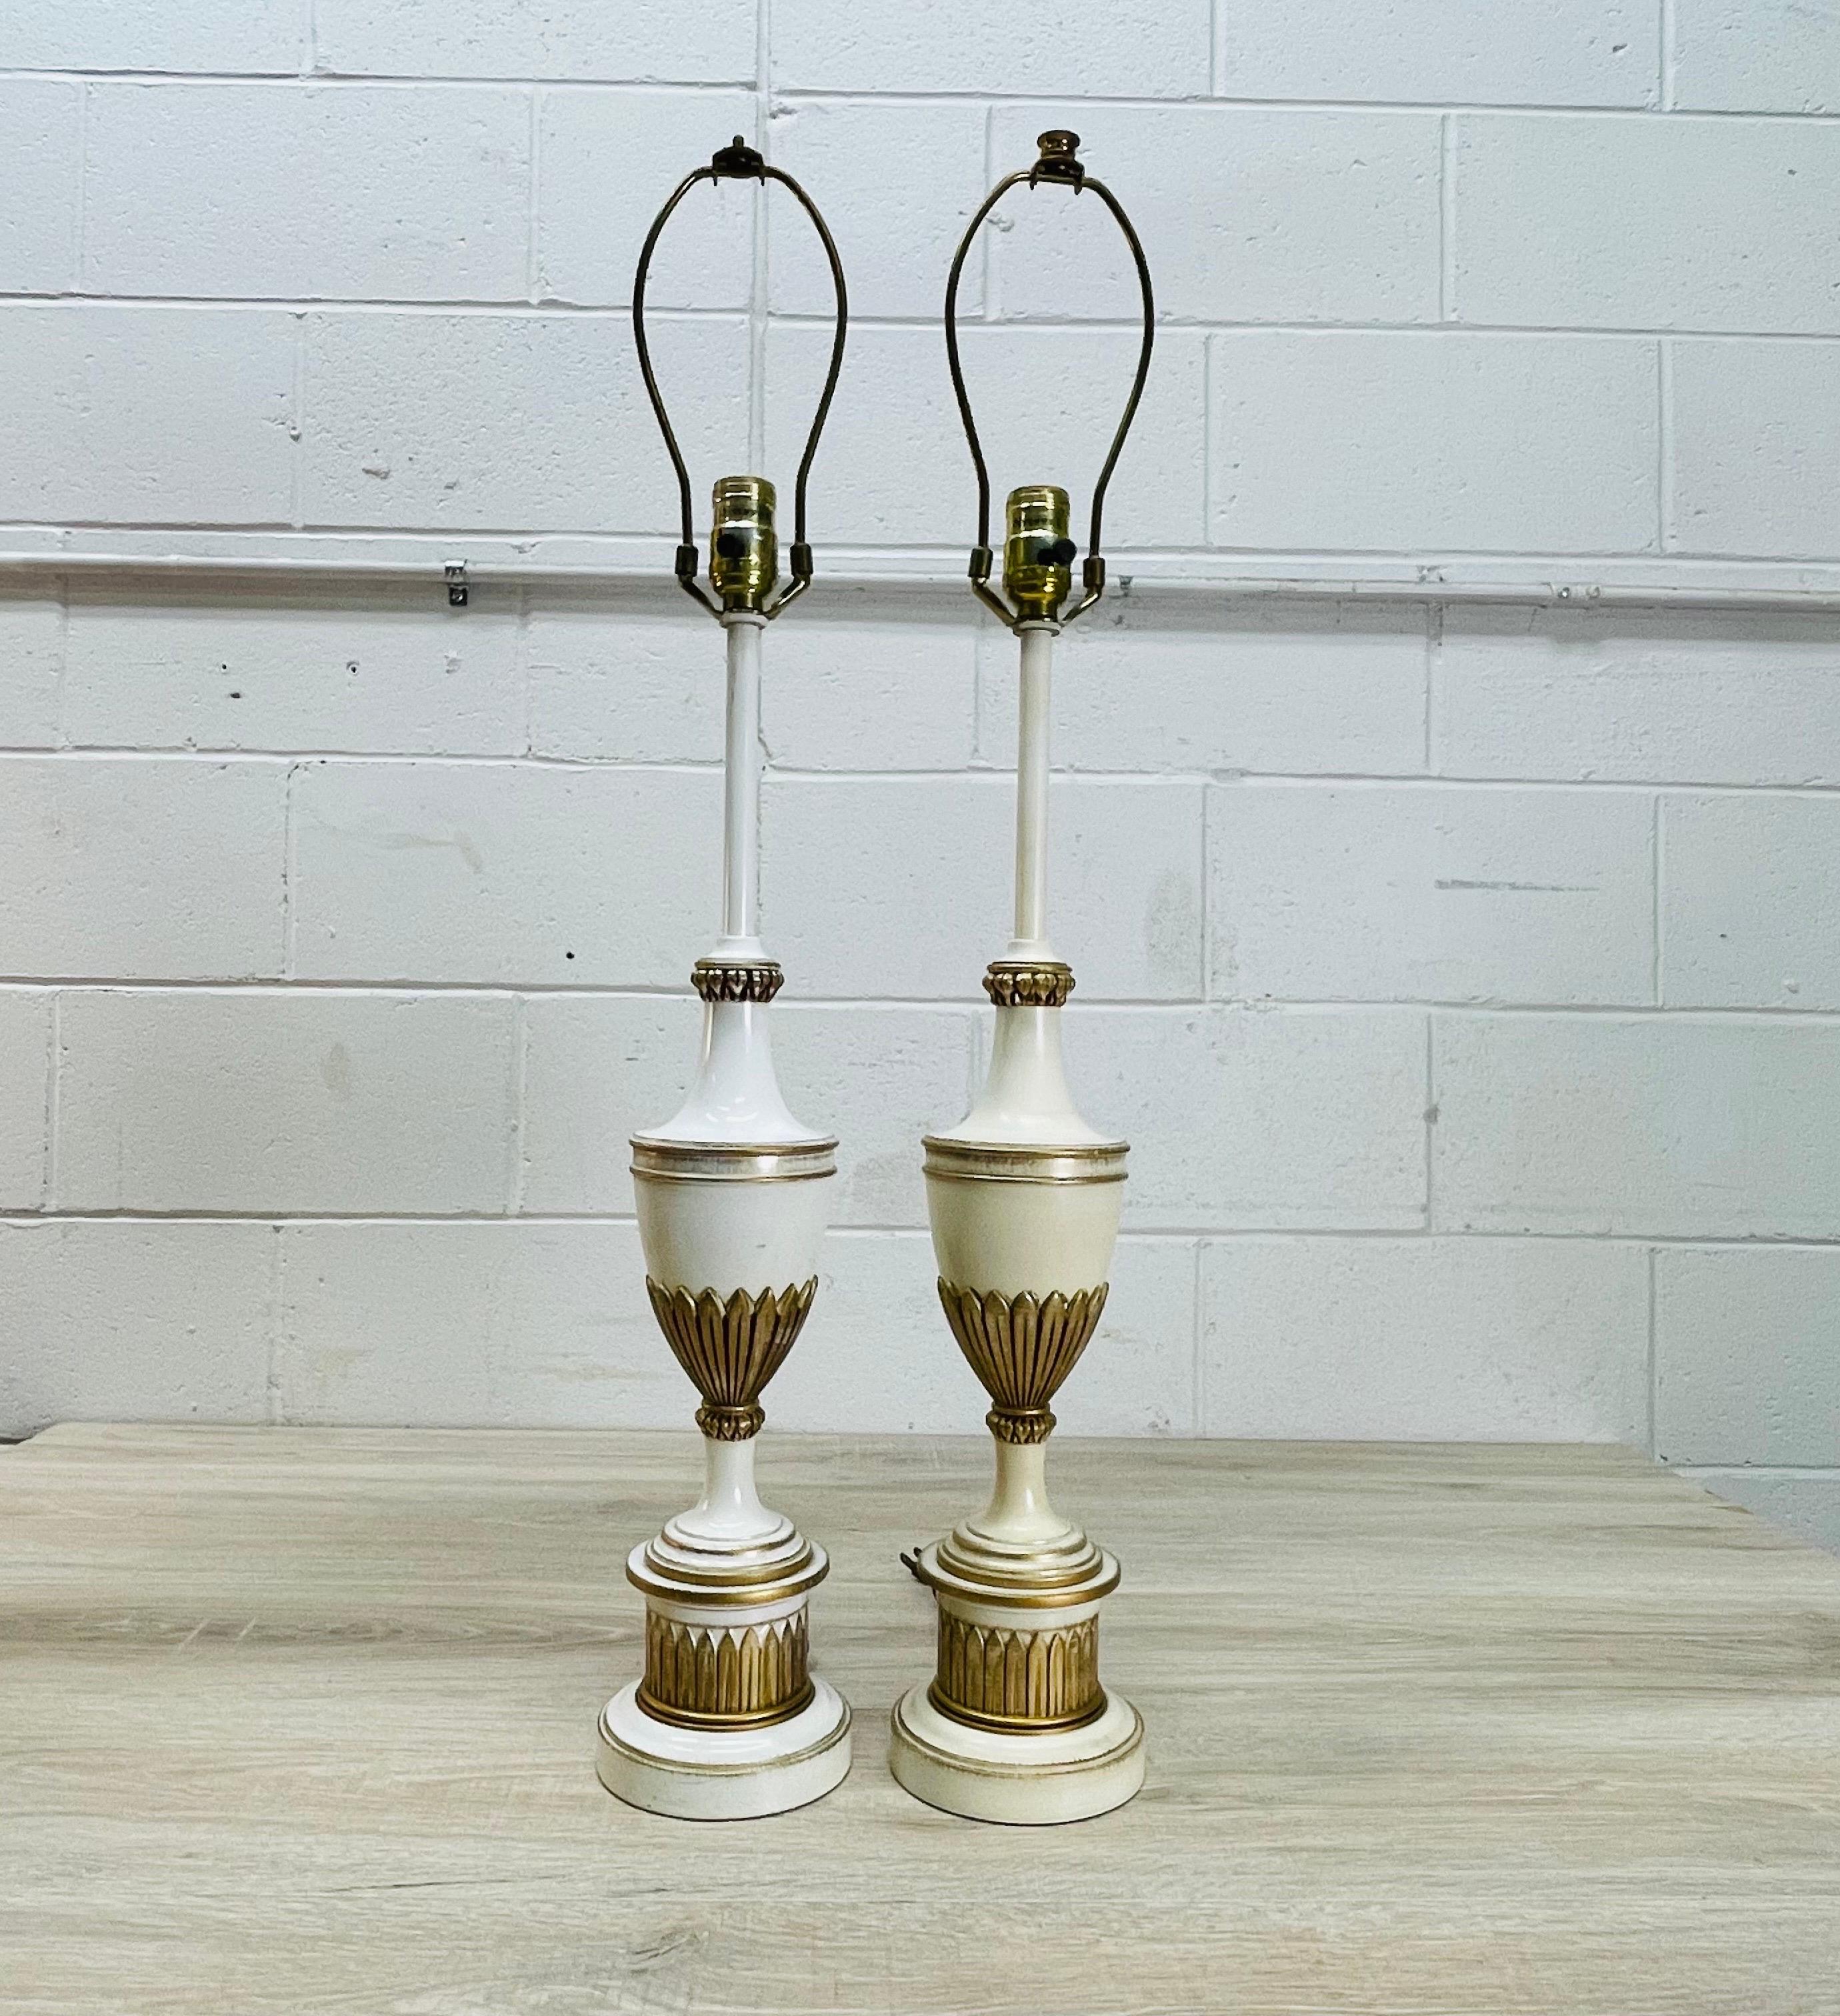 Vintage pair of Stiffel cream and gold metal table lamps. The lamps have a gold leaf design. Wired for the US and in working condition. The lamps use a standard 100W bulb. Socket, 25”H. Harp, 4”Dia x 8”H. One finial is missing and one lamp is